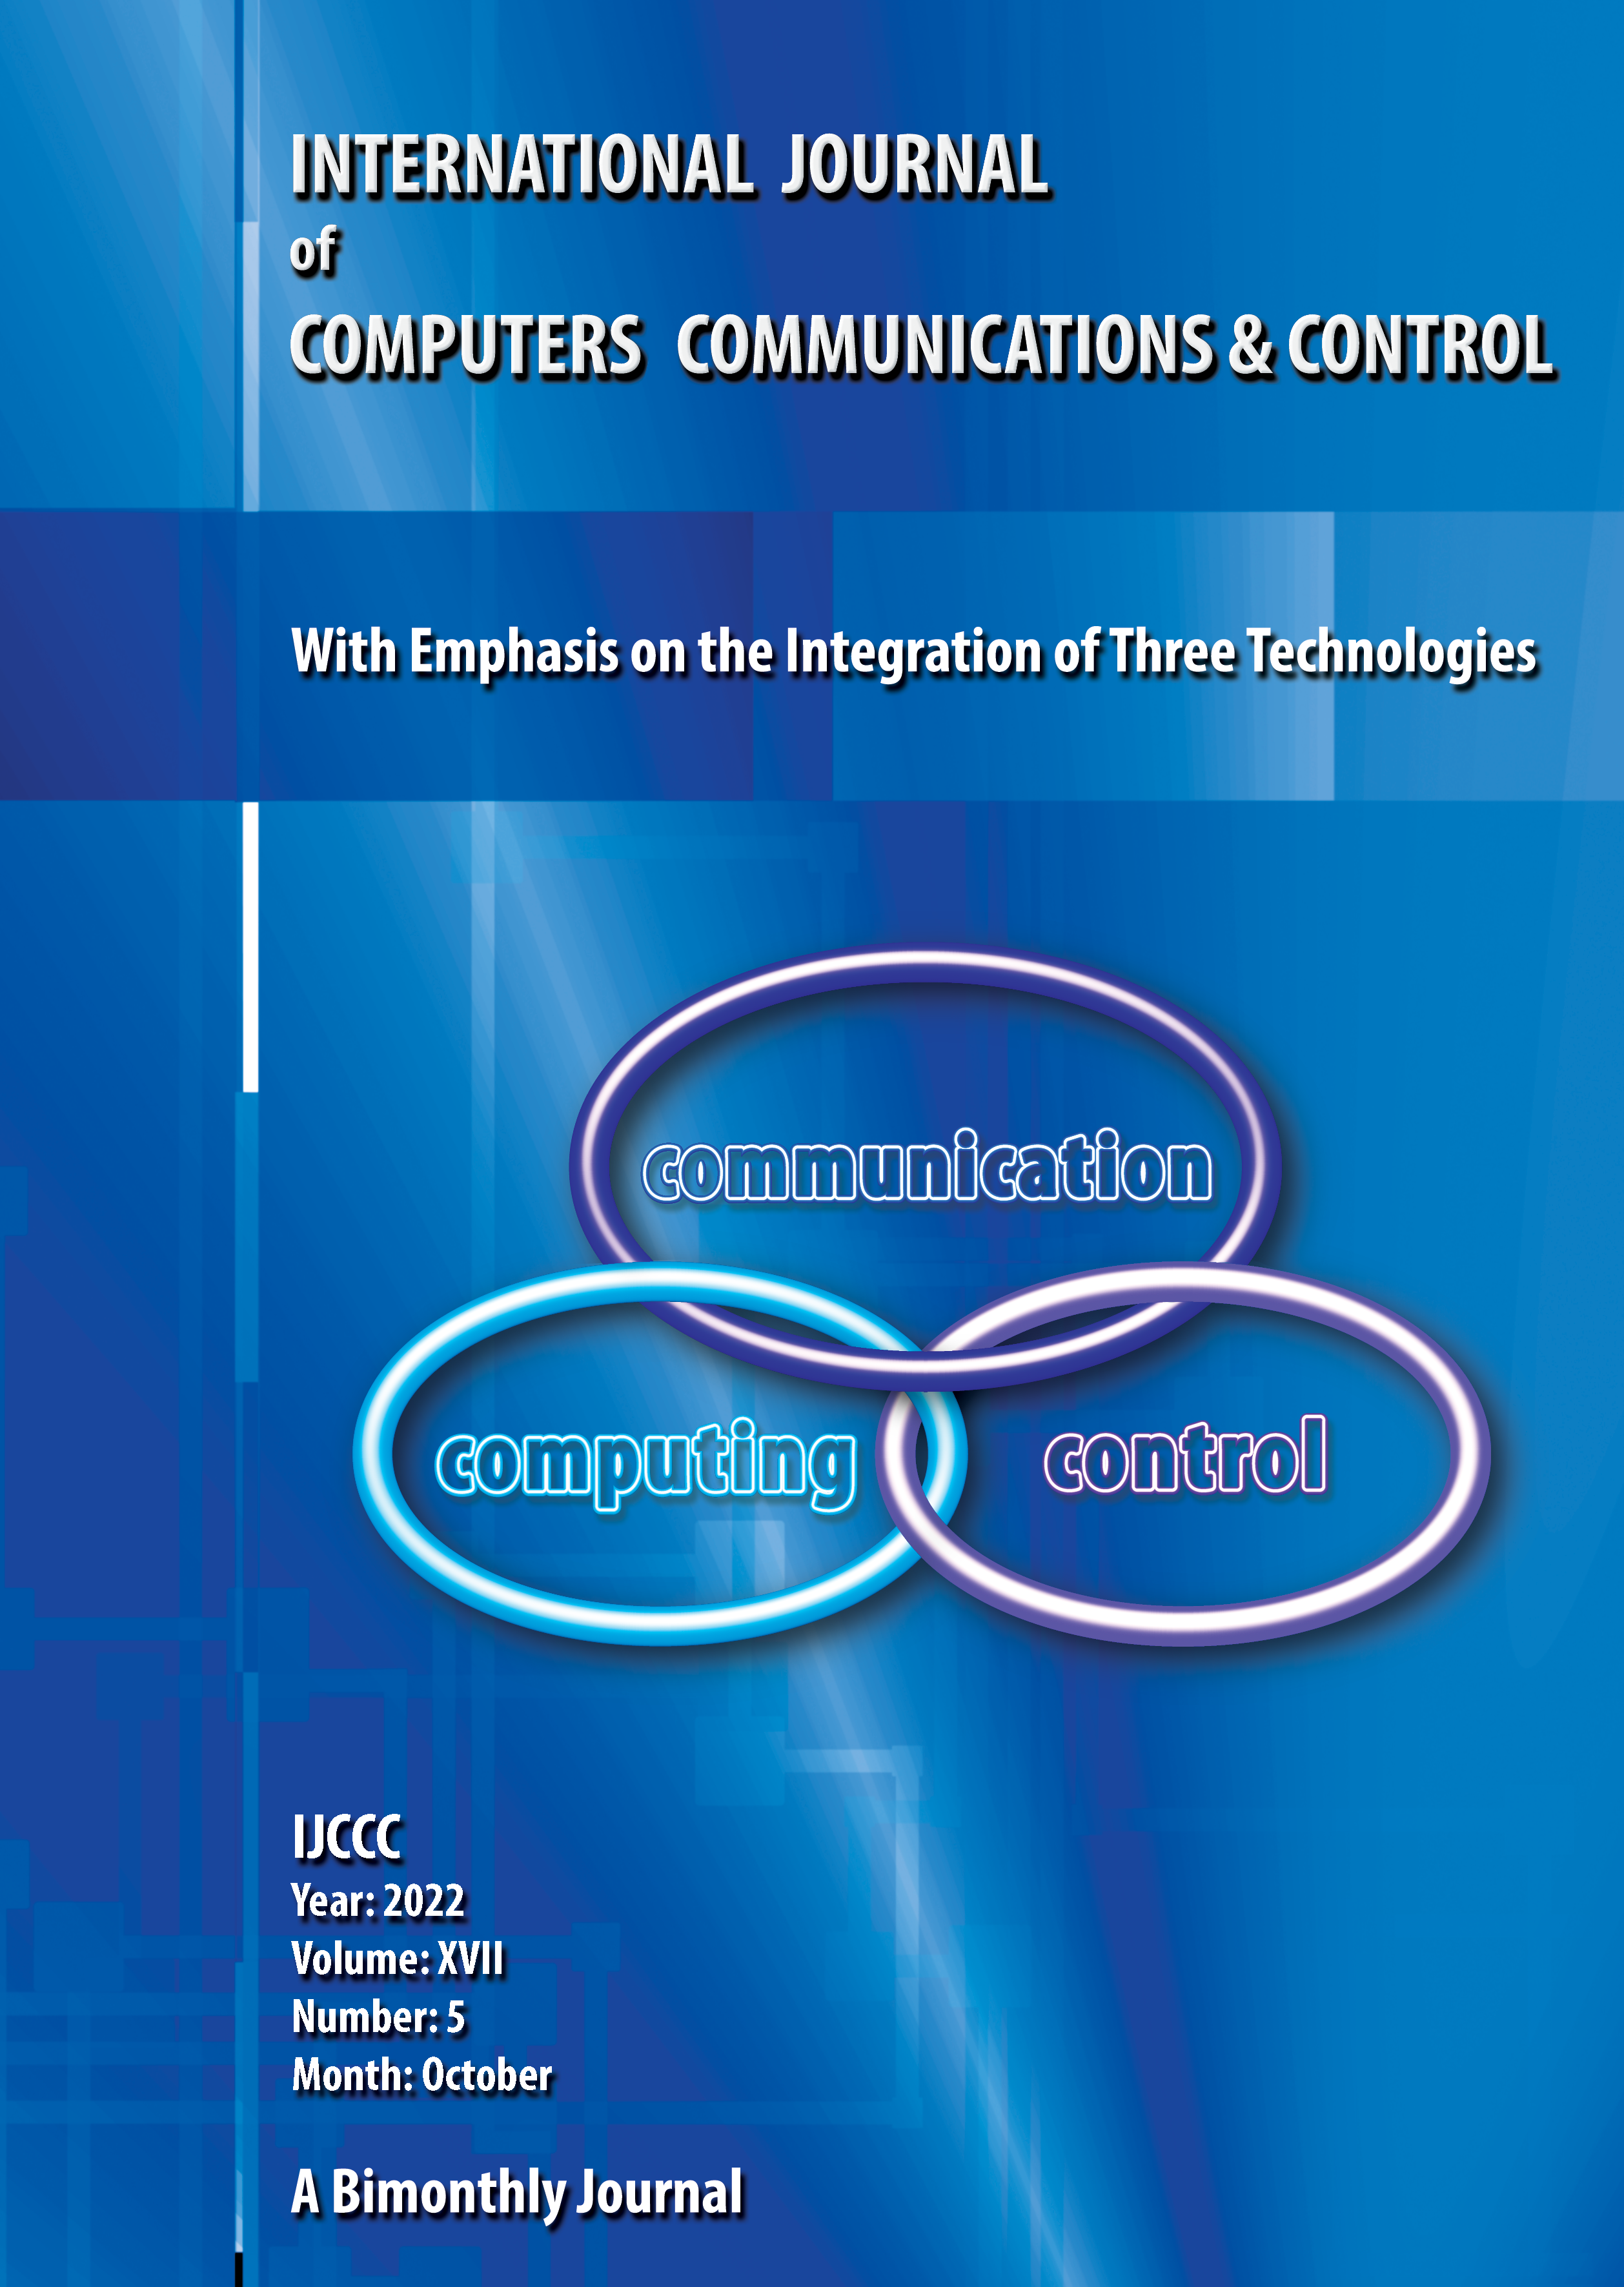 					View Vol. 17 No. 5 (2022): International Journal of Computers Communications & Control (October)
				